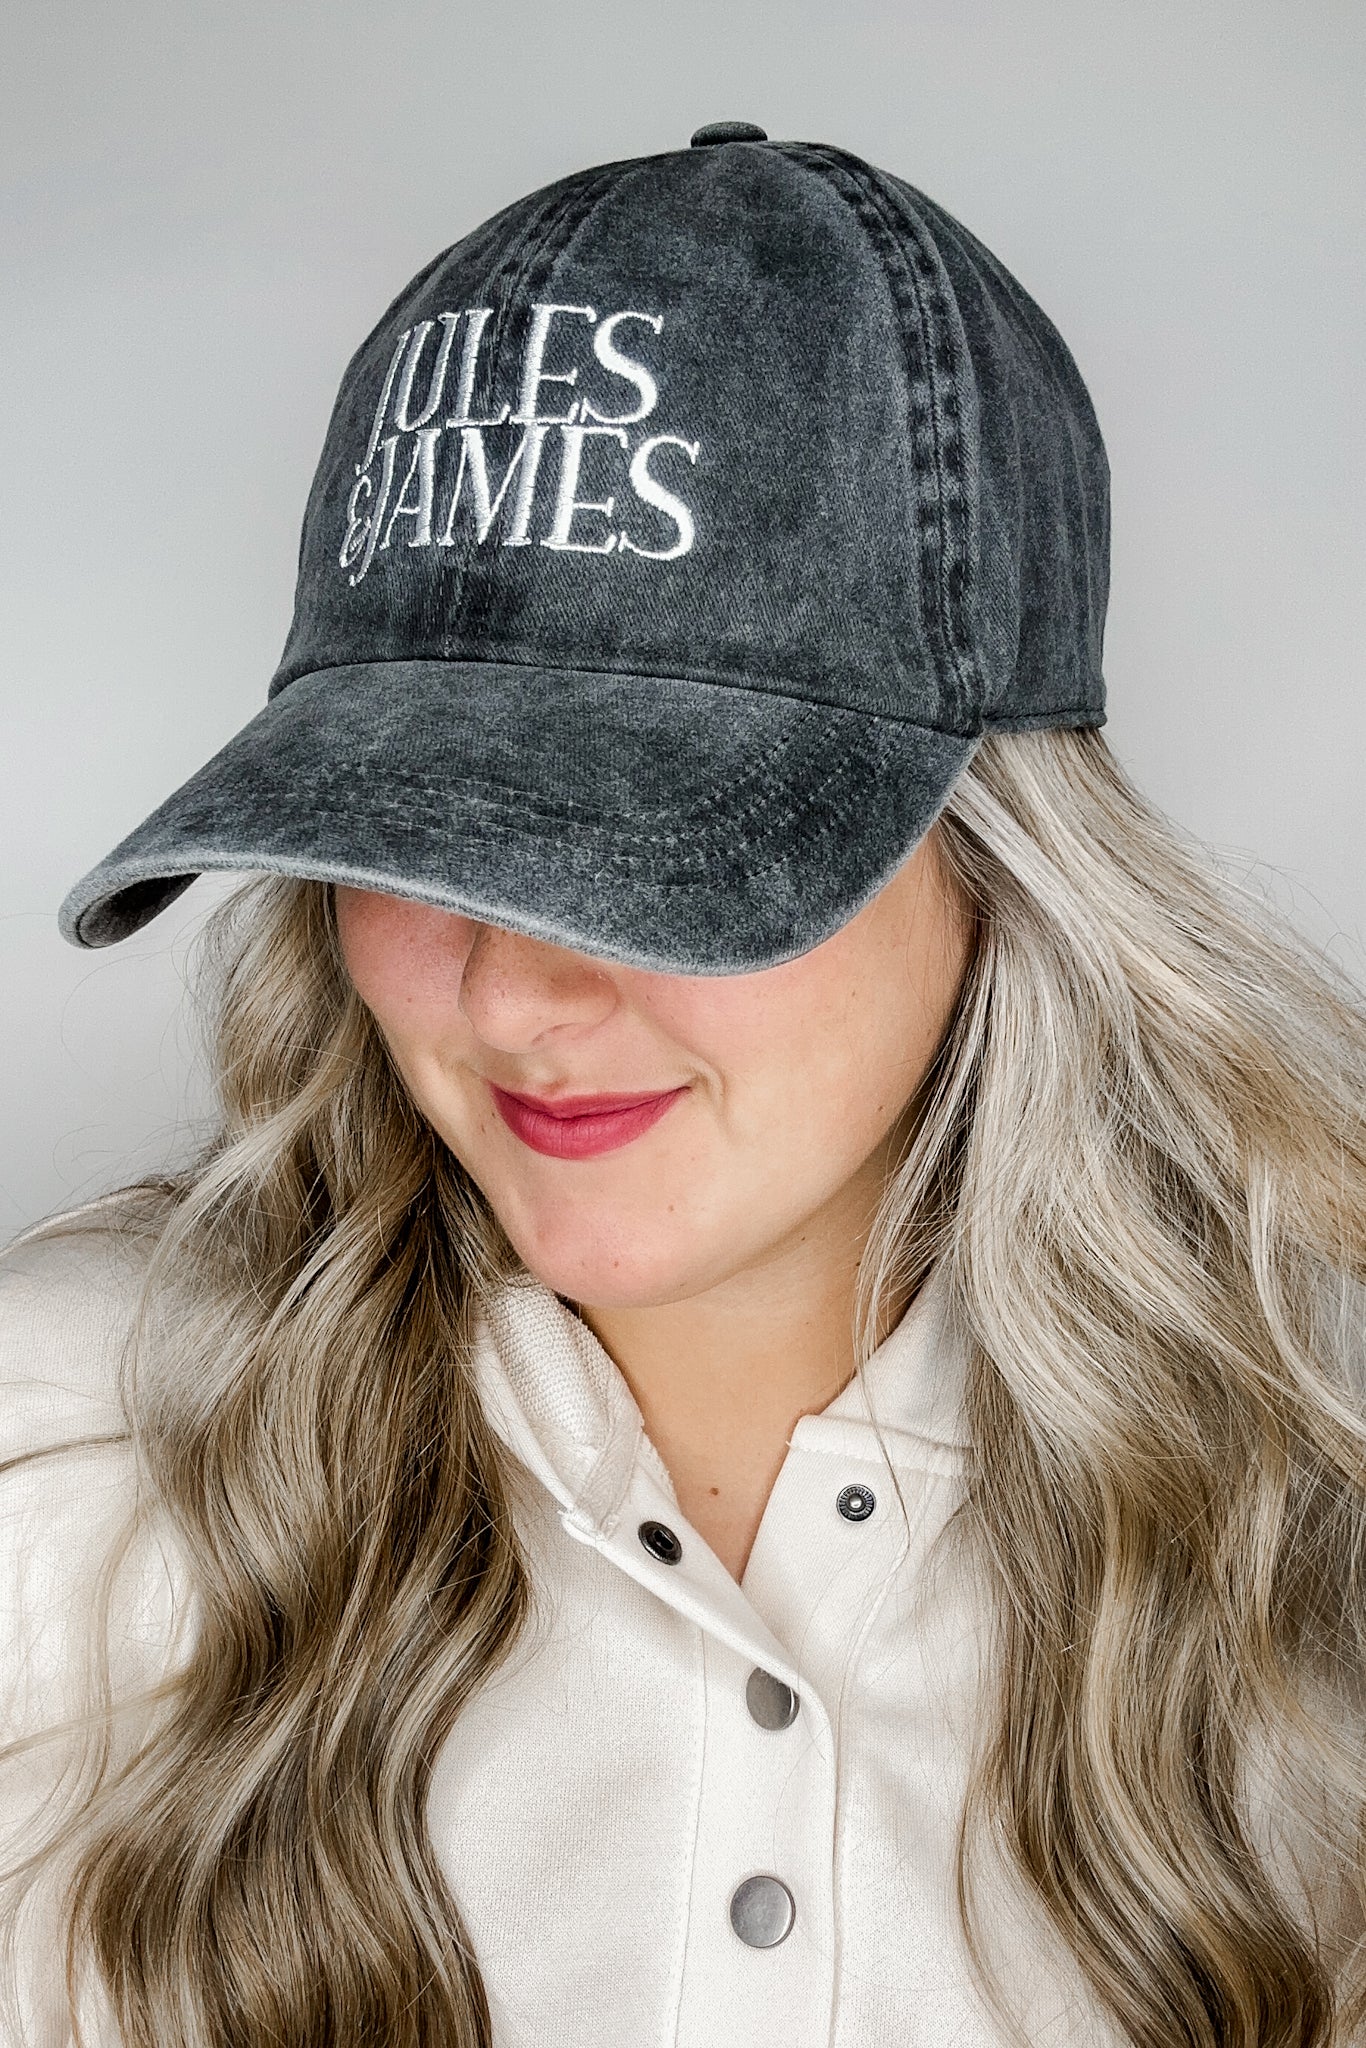 Signature Jules & James Embroidered Ball Cap- 5 Colors!